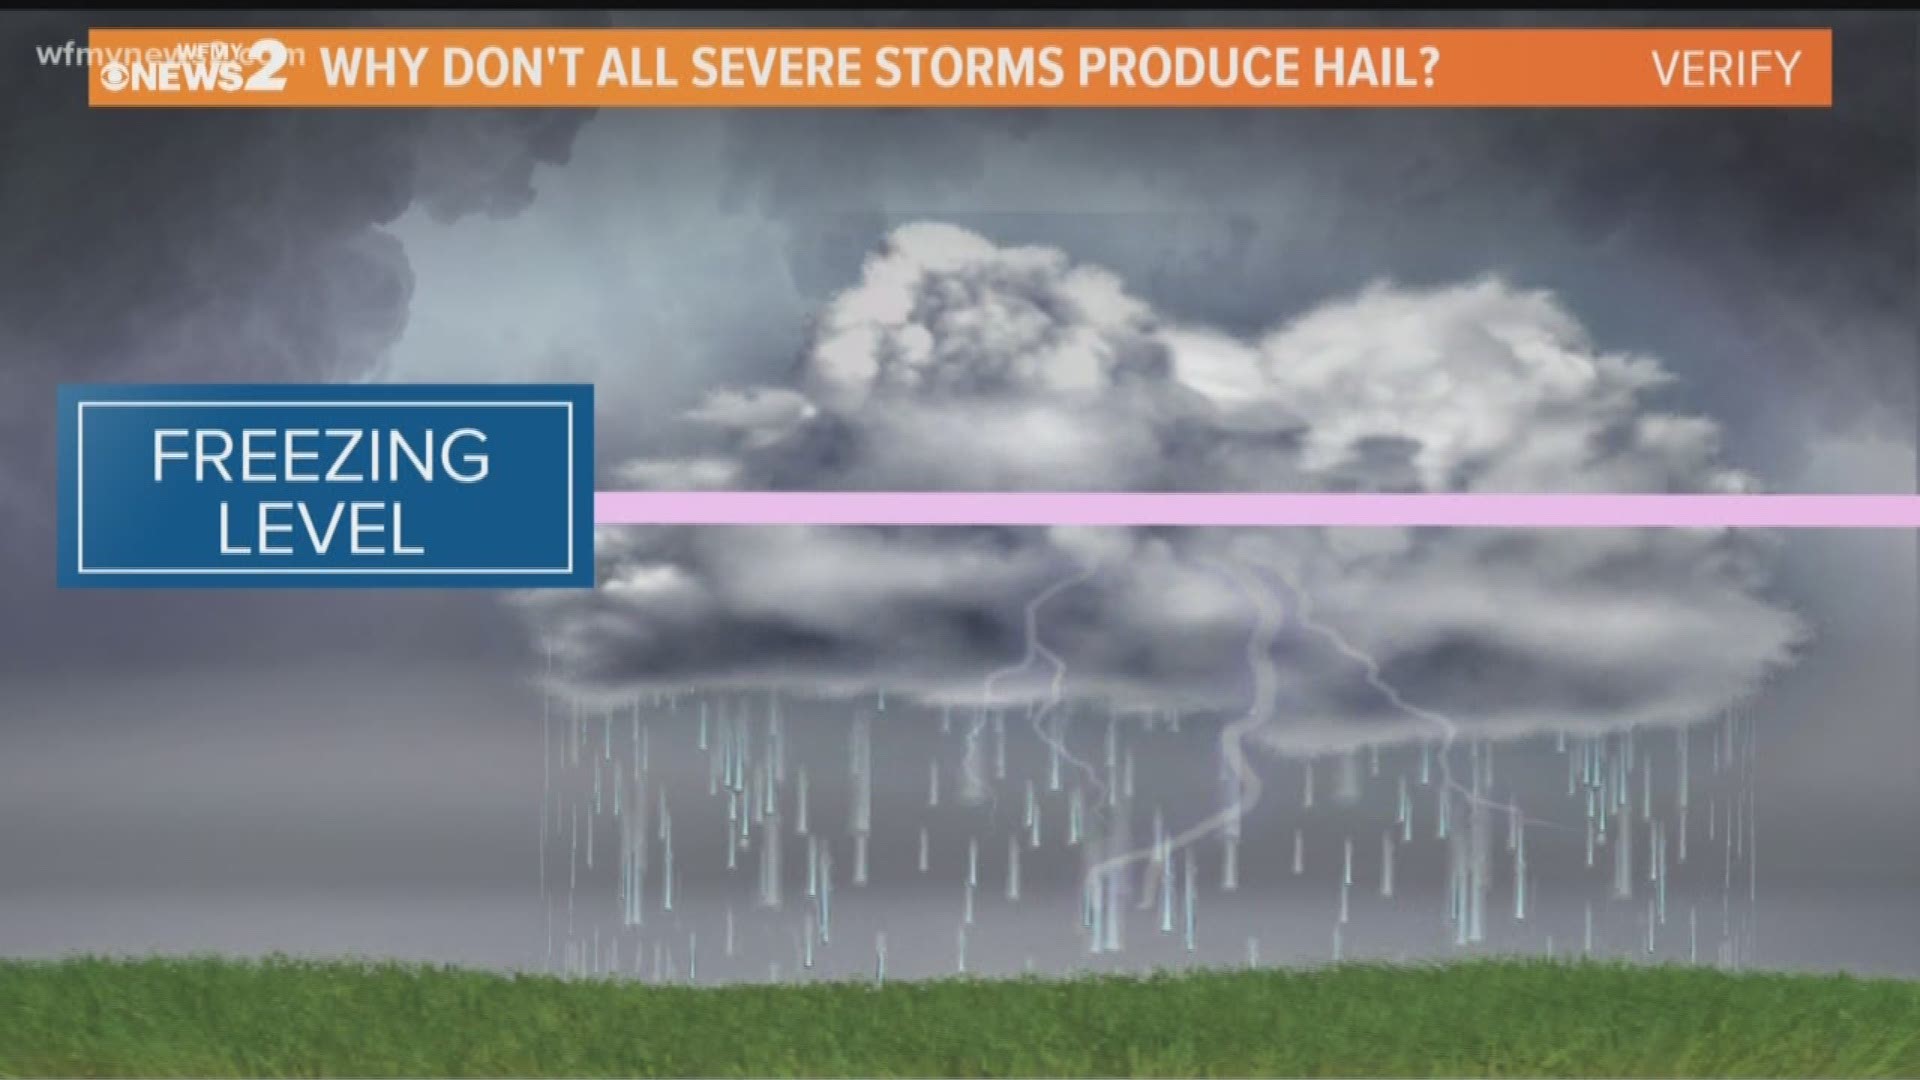 Does hail always come before a tornado hits? We Verify.